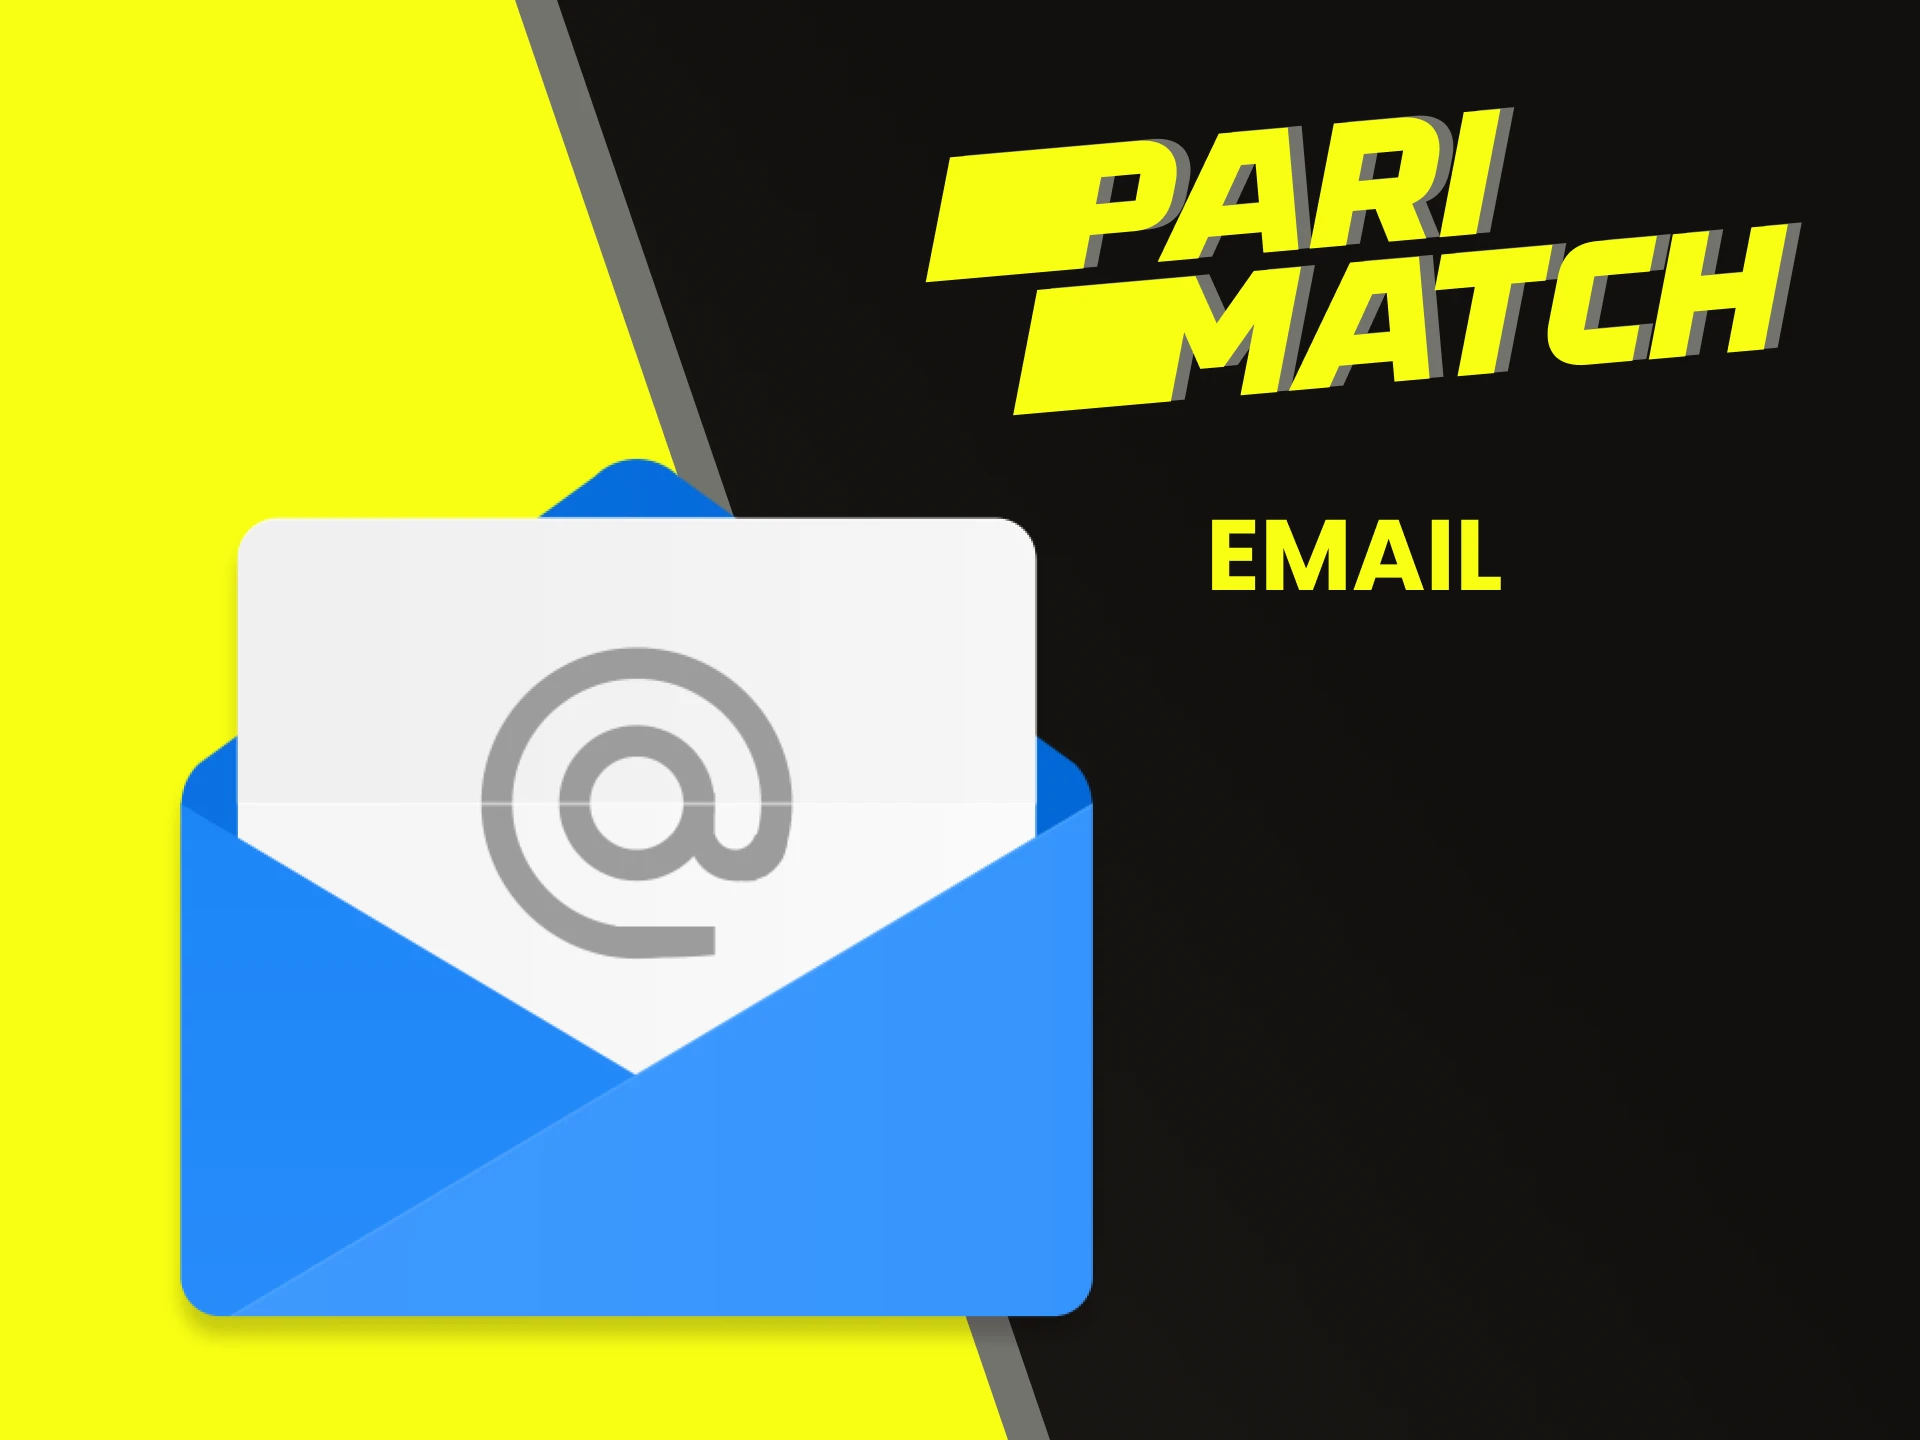 To contact Parimatch technical support, write to them by email.